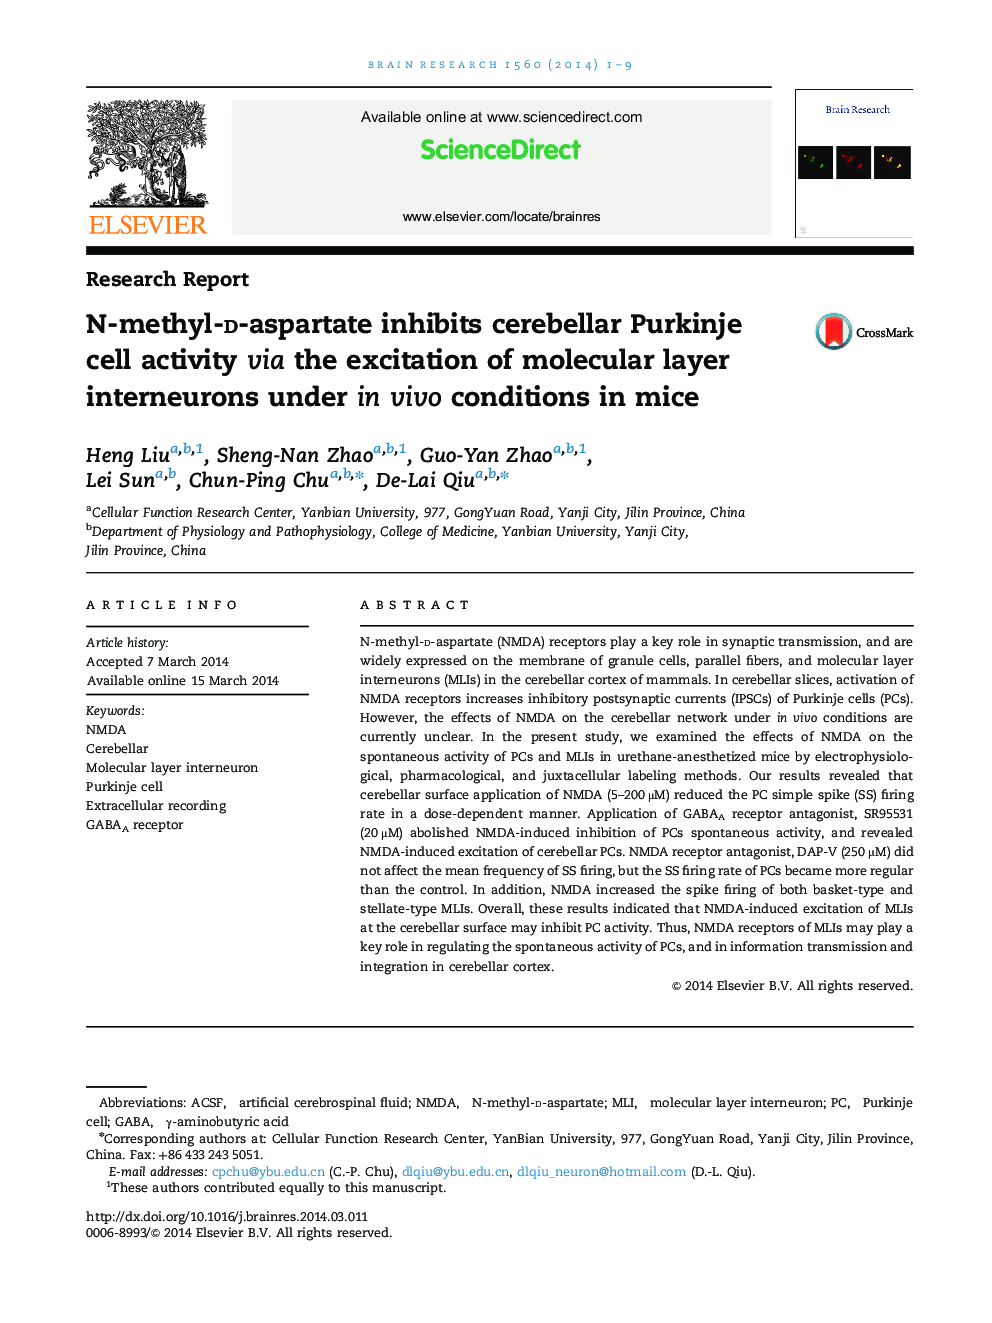 N-methyl-d-aspartate inhibits cerebellar Purkinje cell activity via the excitation of molecular layer interneurons under in vivo conditions in mice